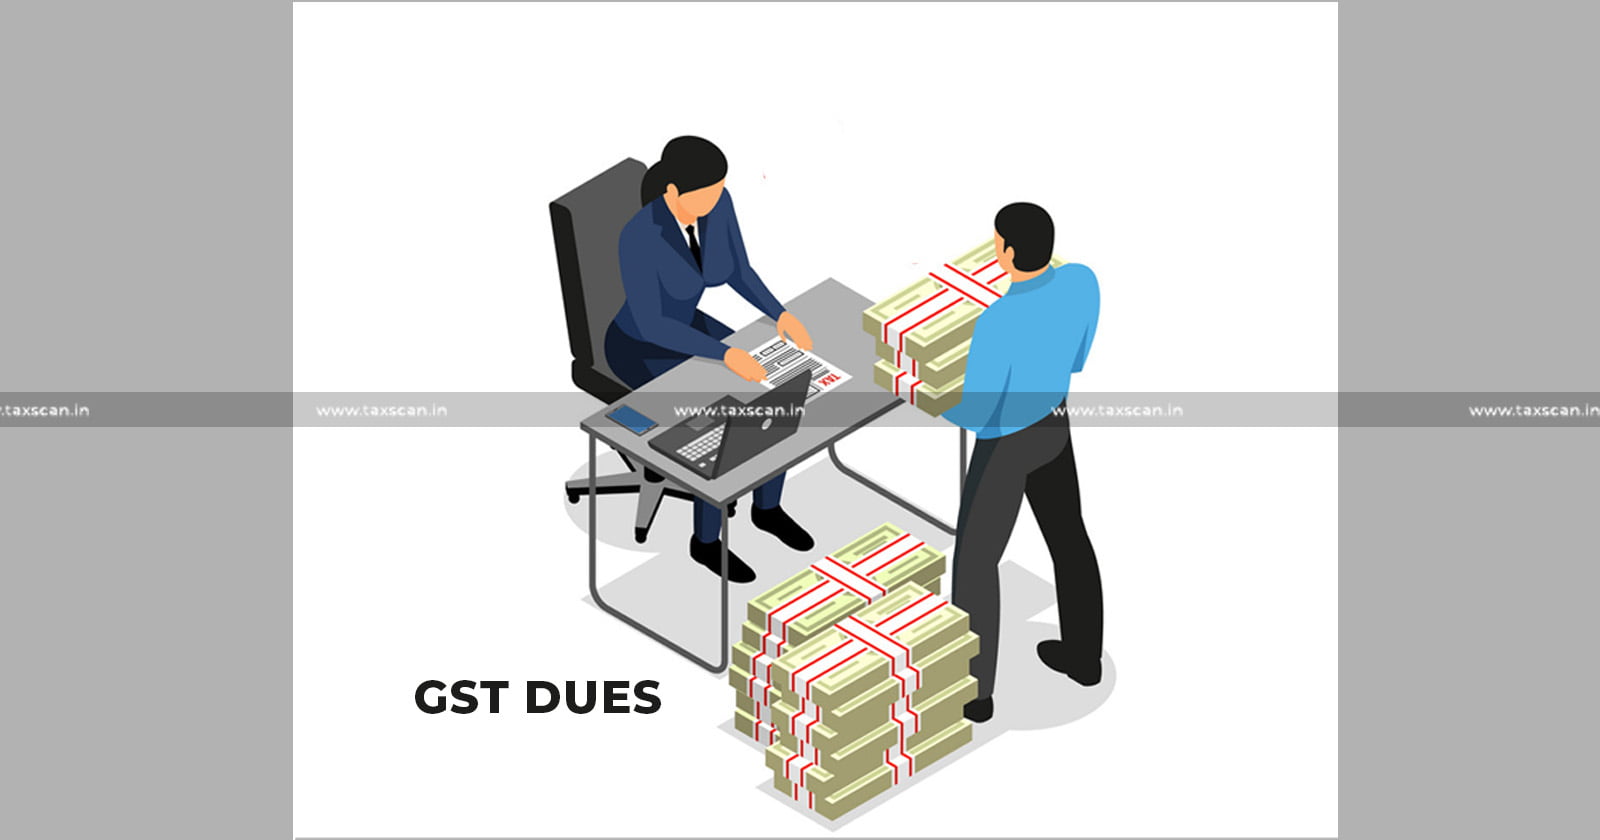 Treatment of GST - Insolvency Proceedings - GST Council - CGST - Form DRC-25 - taxscan